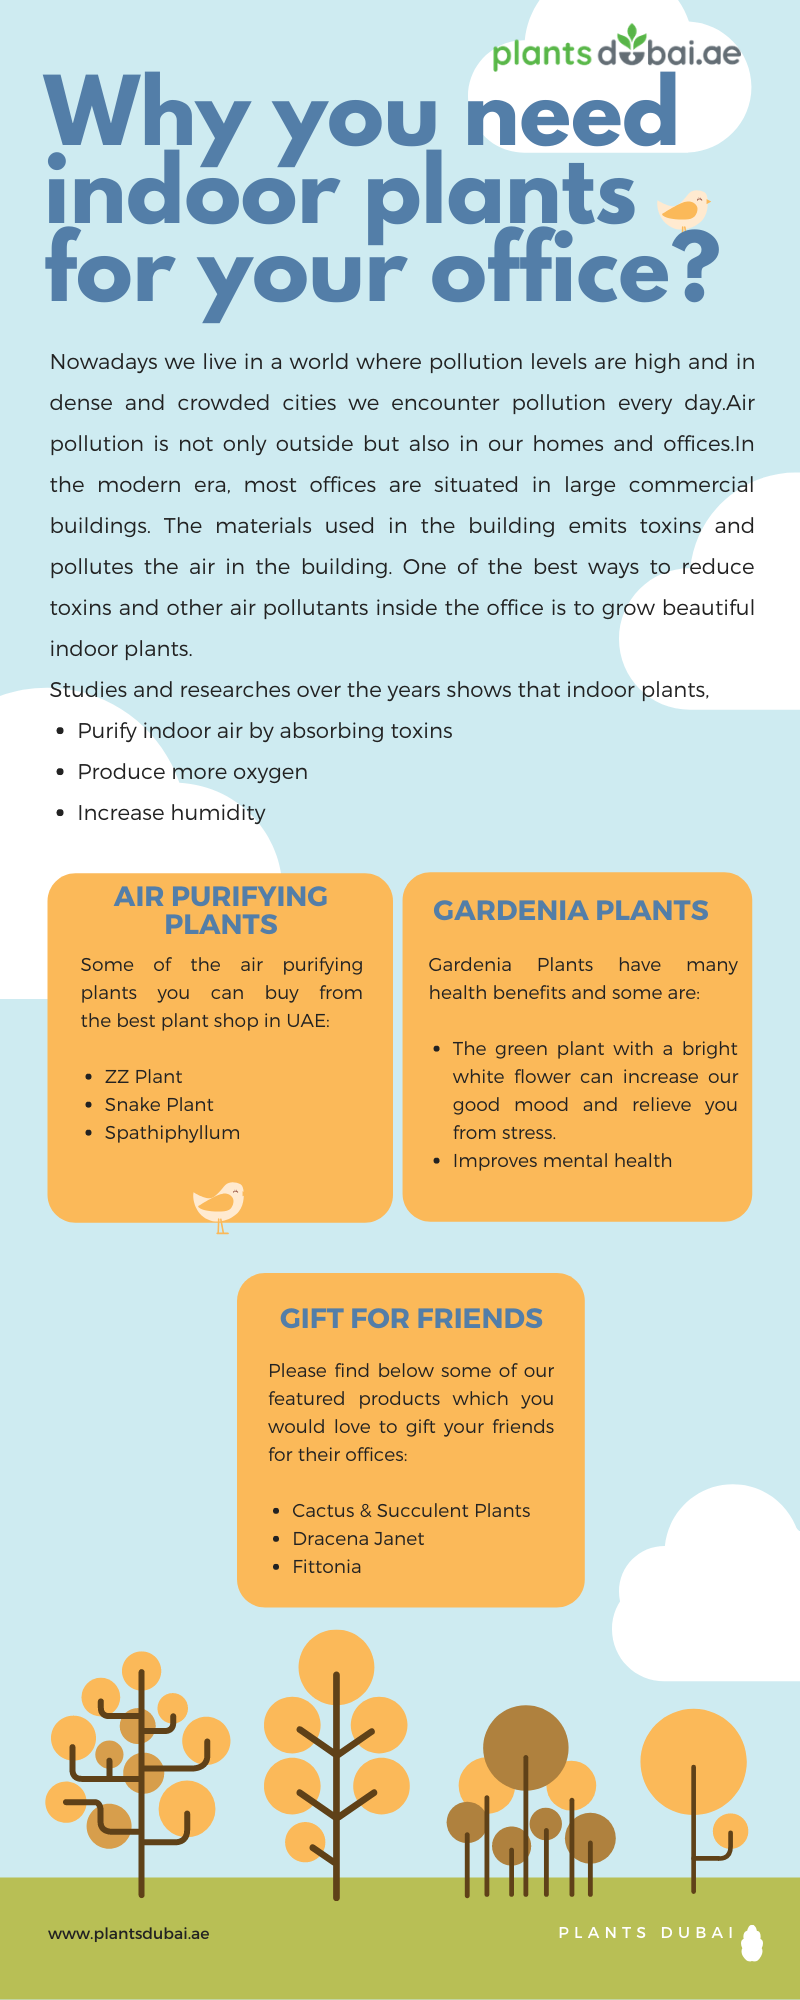 Why You Need Indoor Plants For Your Office?